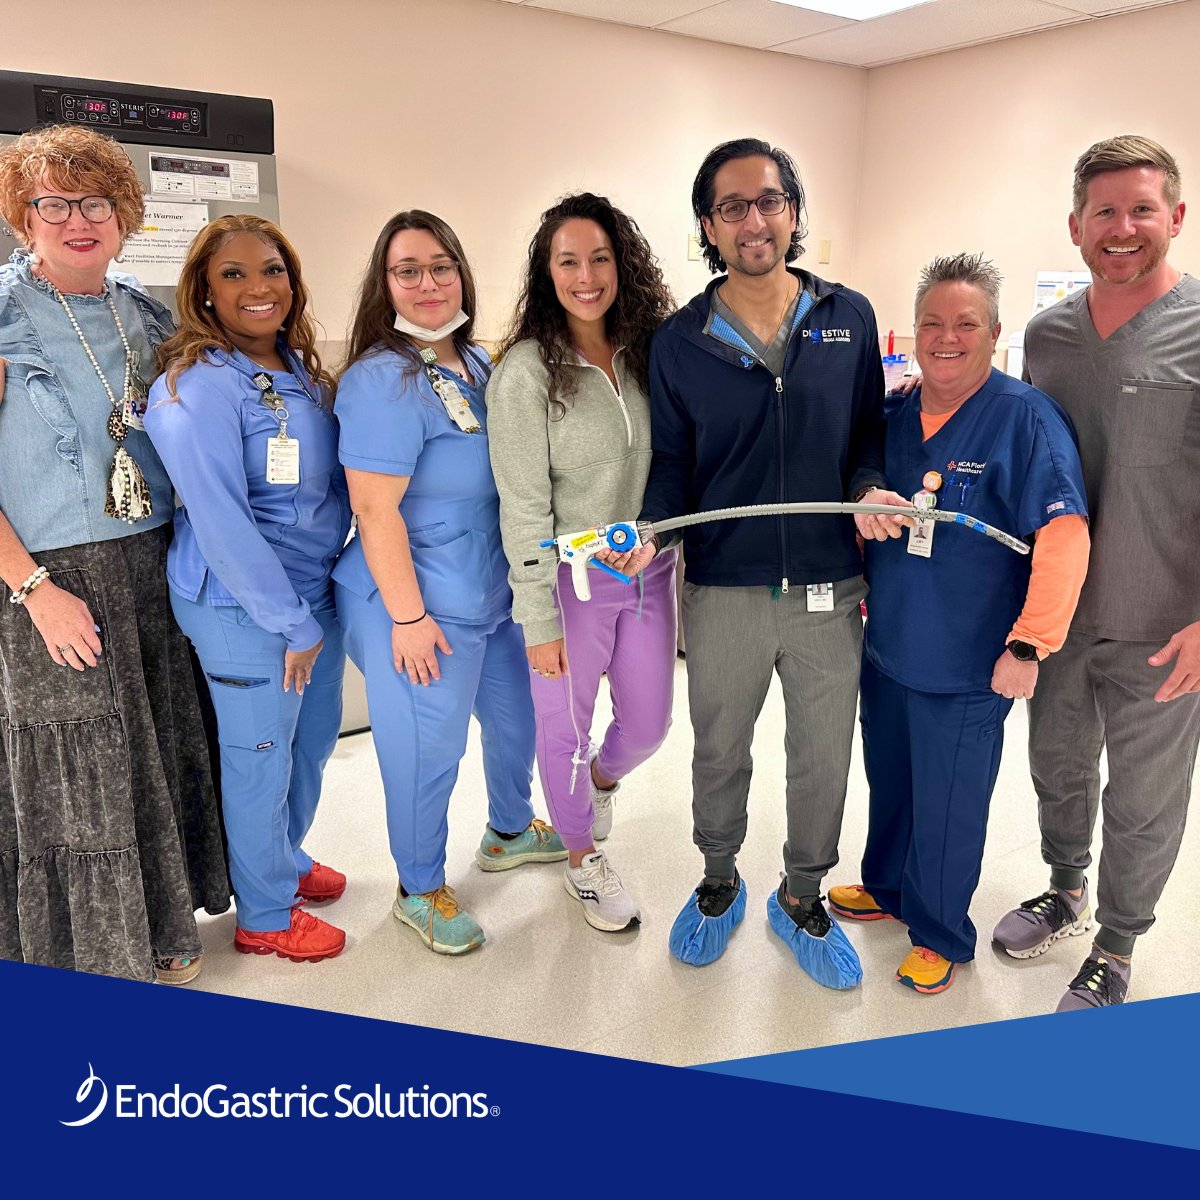 Congratulations to Gastroenterologist Dr. Tony Brar on his first TIF 2.0 procedure at HCA Florida - North Florida Hospital.

Thank you for your support in helping patients suffering from chronic GERD find relief.

#MedicalMilestone #TeamTIF #Hospital #PatientSafety #MedDevice